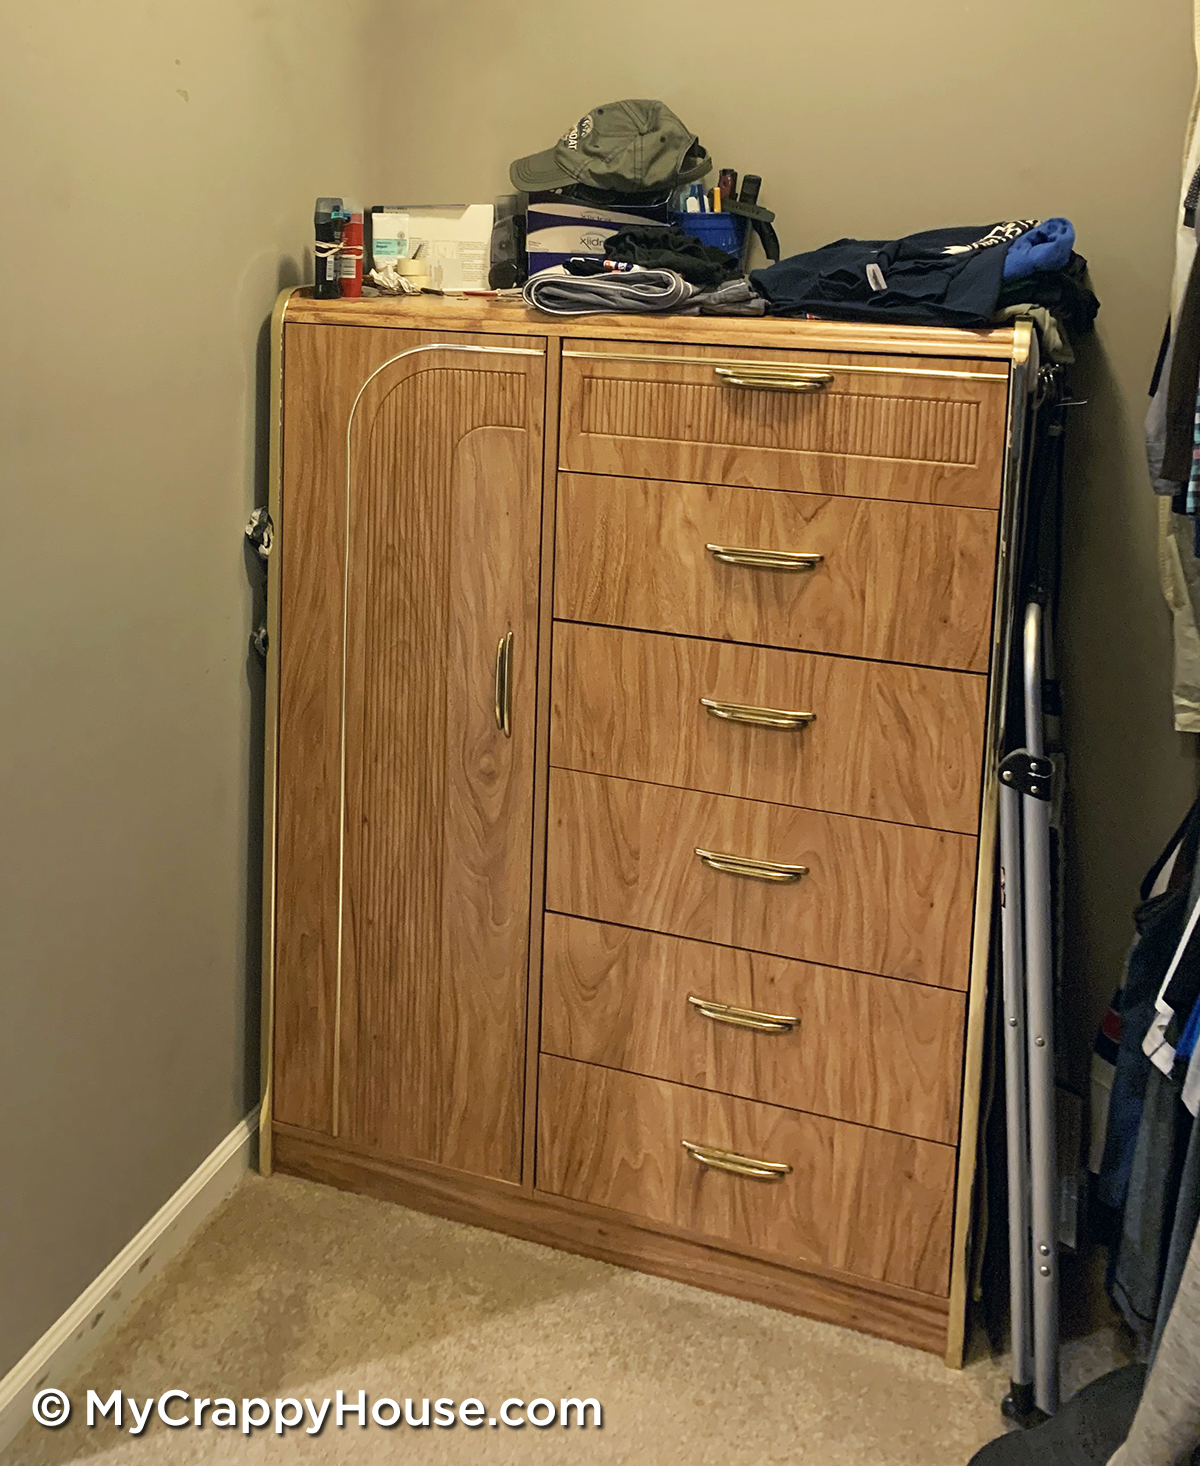 Chest of drawers in closet